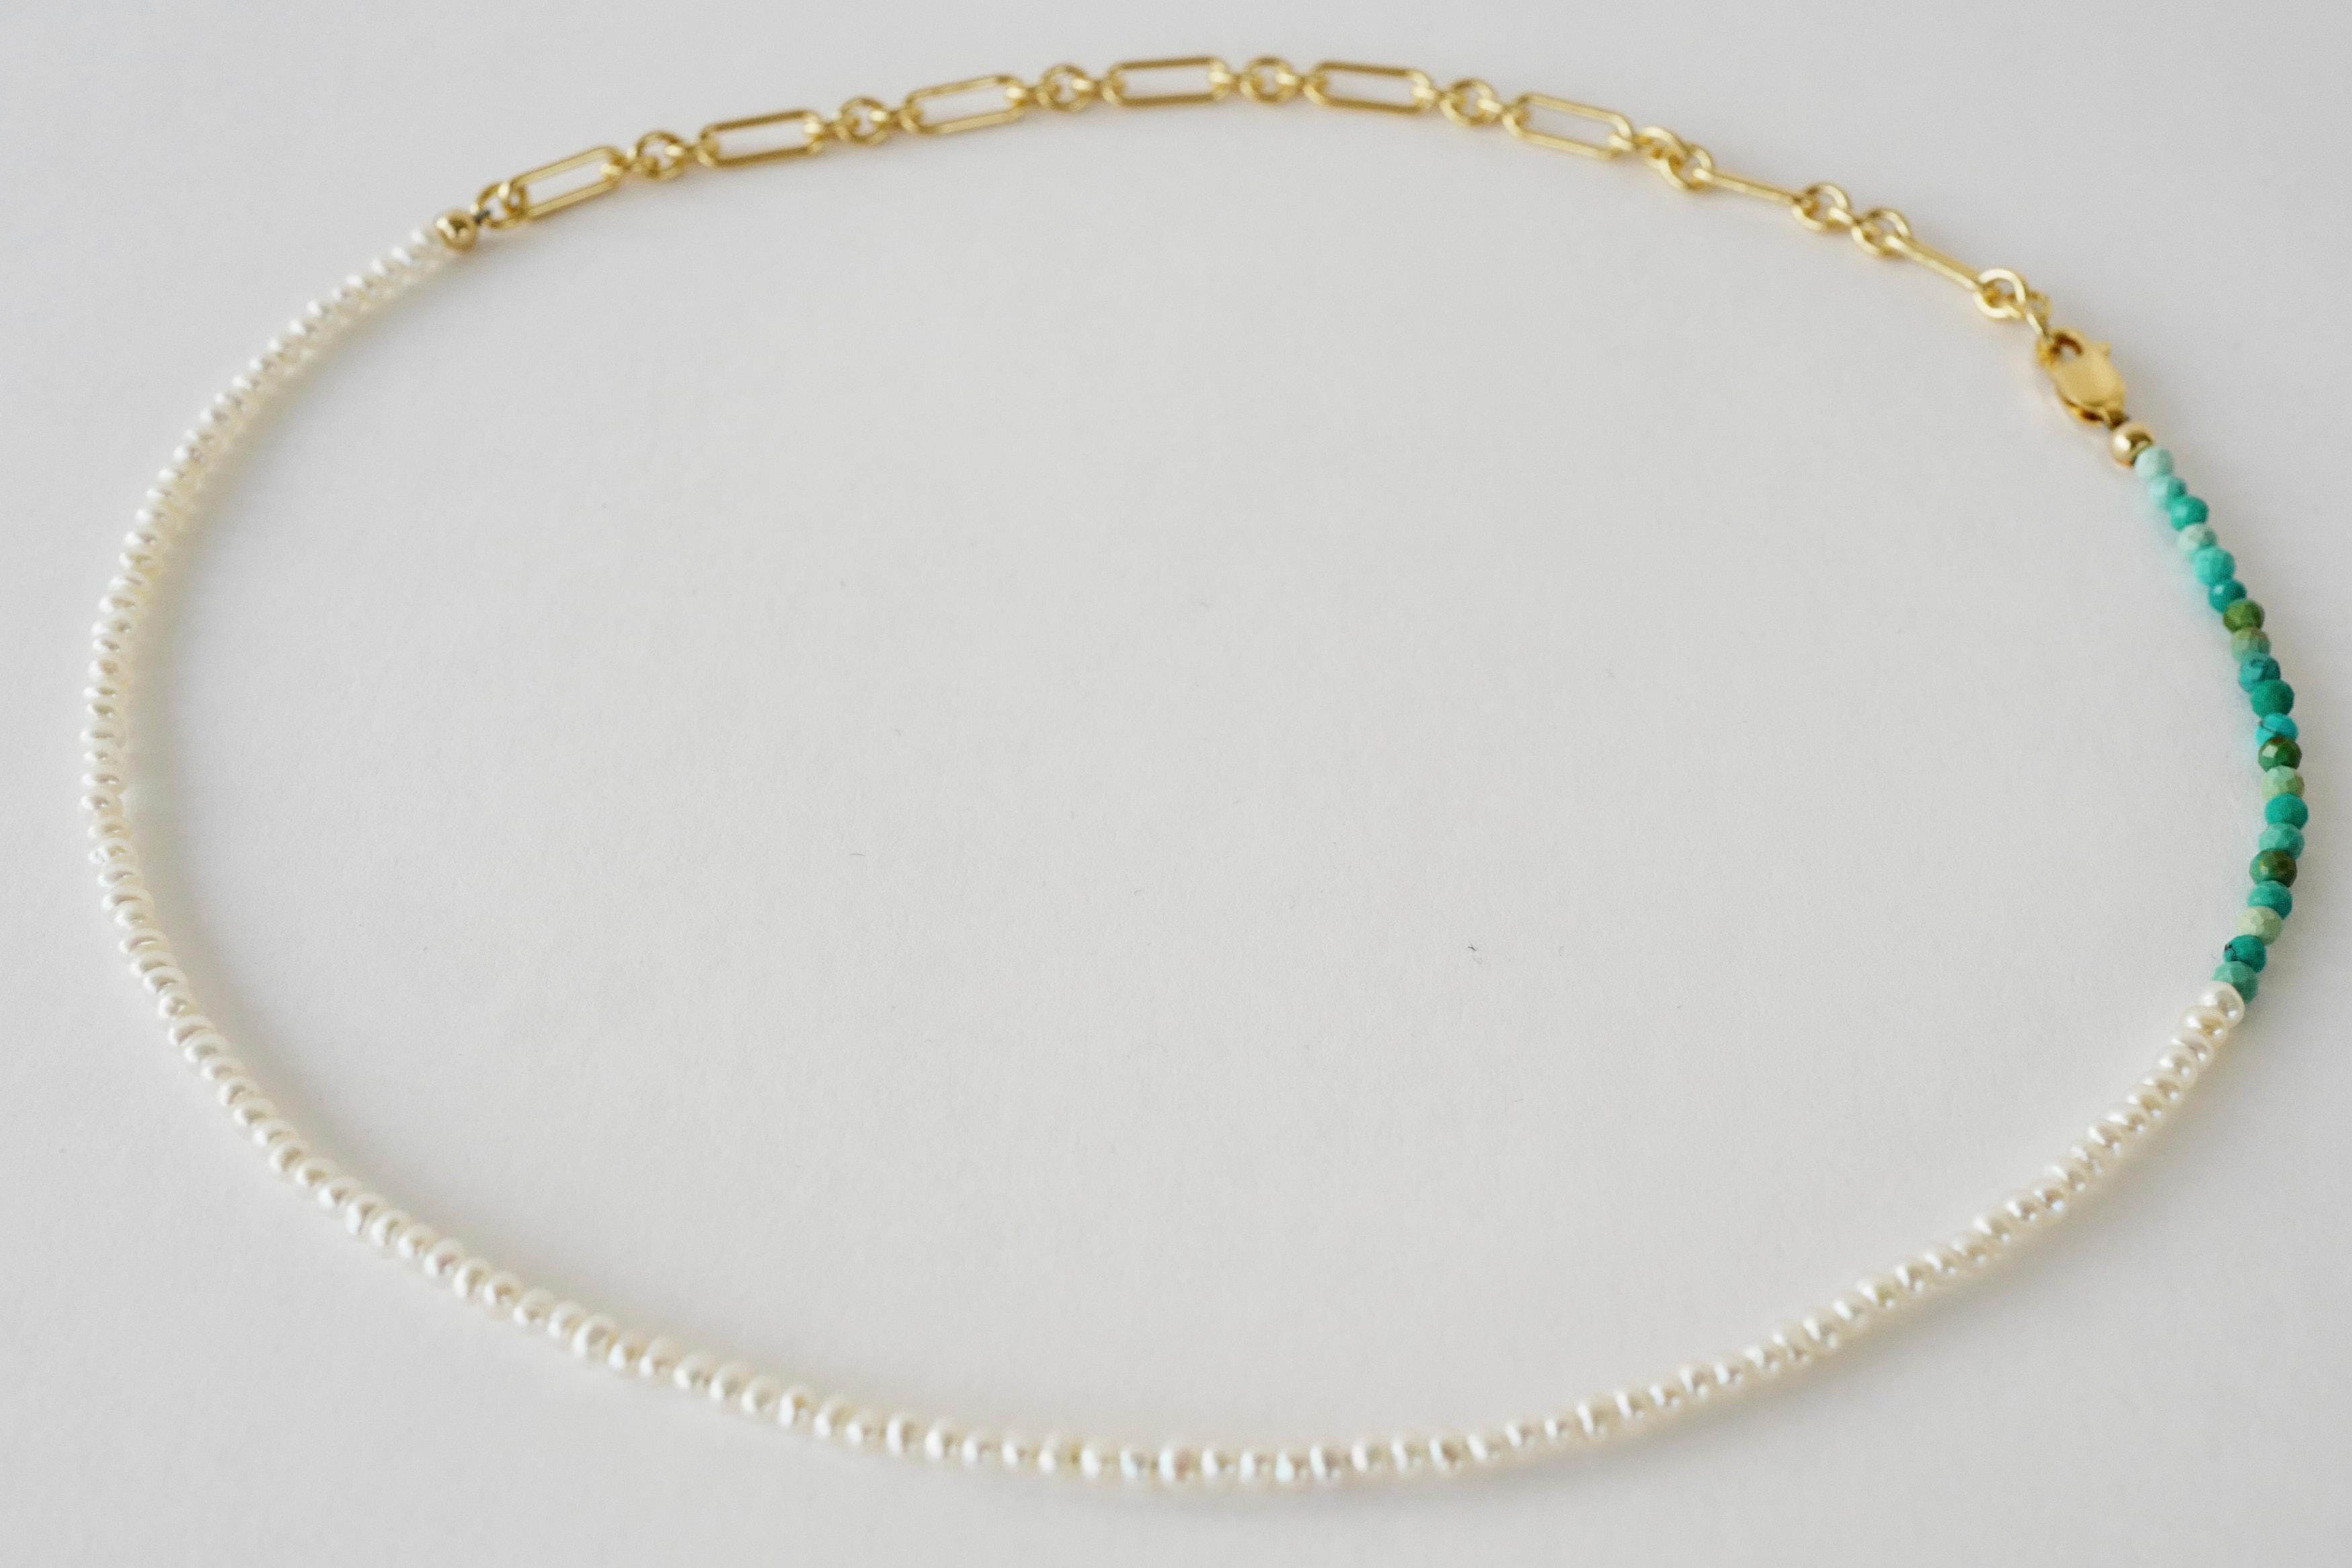 Round Cut White Pearl Turquoise Necklace Gold Tone Chain Bead Choker  J Dauphin For Sale